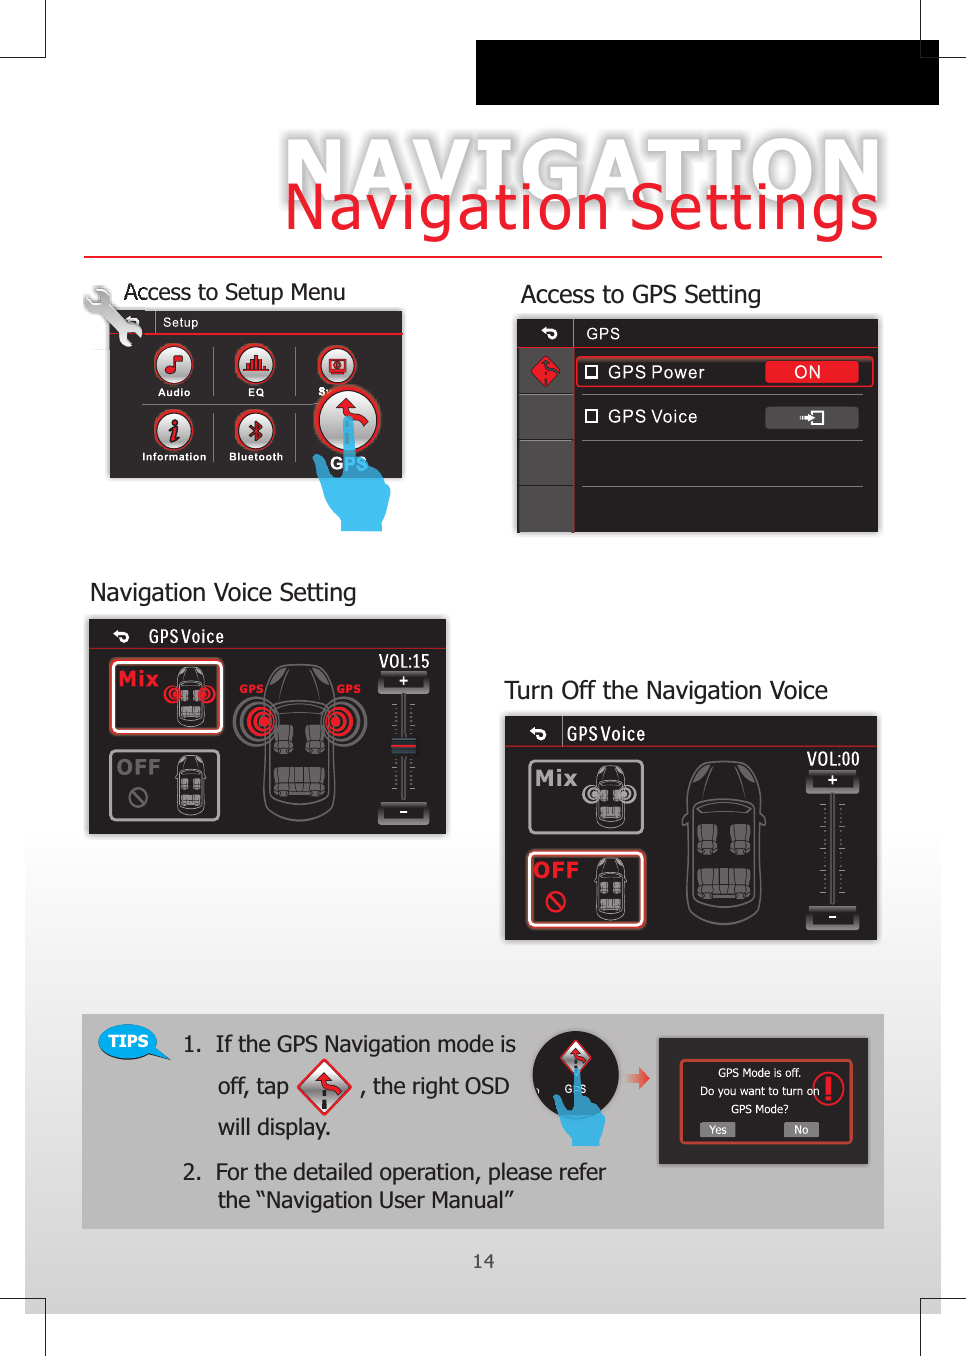 GPS GPSNAVIGATION14Navigation SettingsTIPS 1.  If the GPS Navigation mode is      off, tap          , the right OSD     will display.GPSAccess to Setup Menu Access to GPS SettingNavigation Voice SettingTurn Off the Navigation Voice2.       the “Navigation User Manual”                               For the detailed operation, please refer 